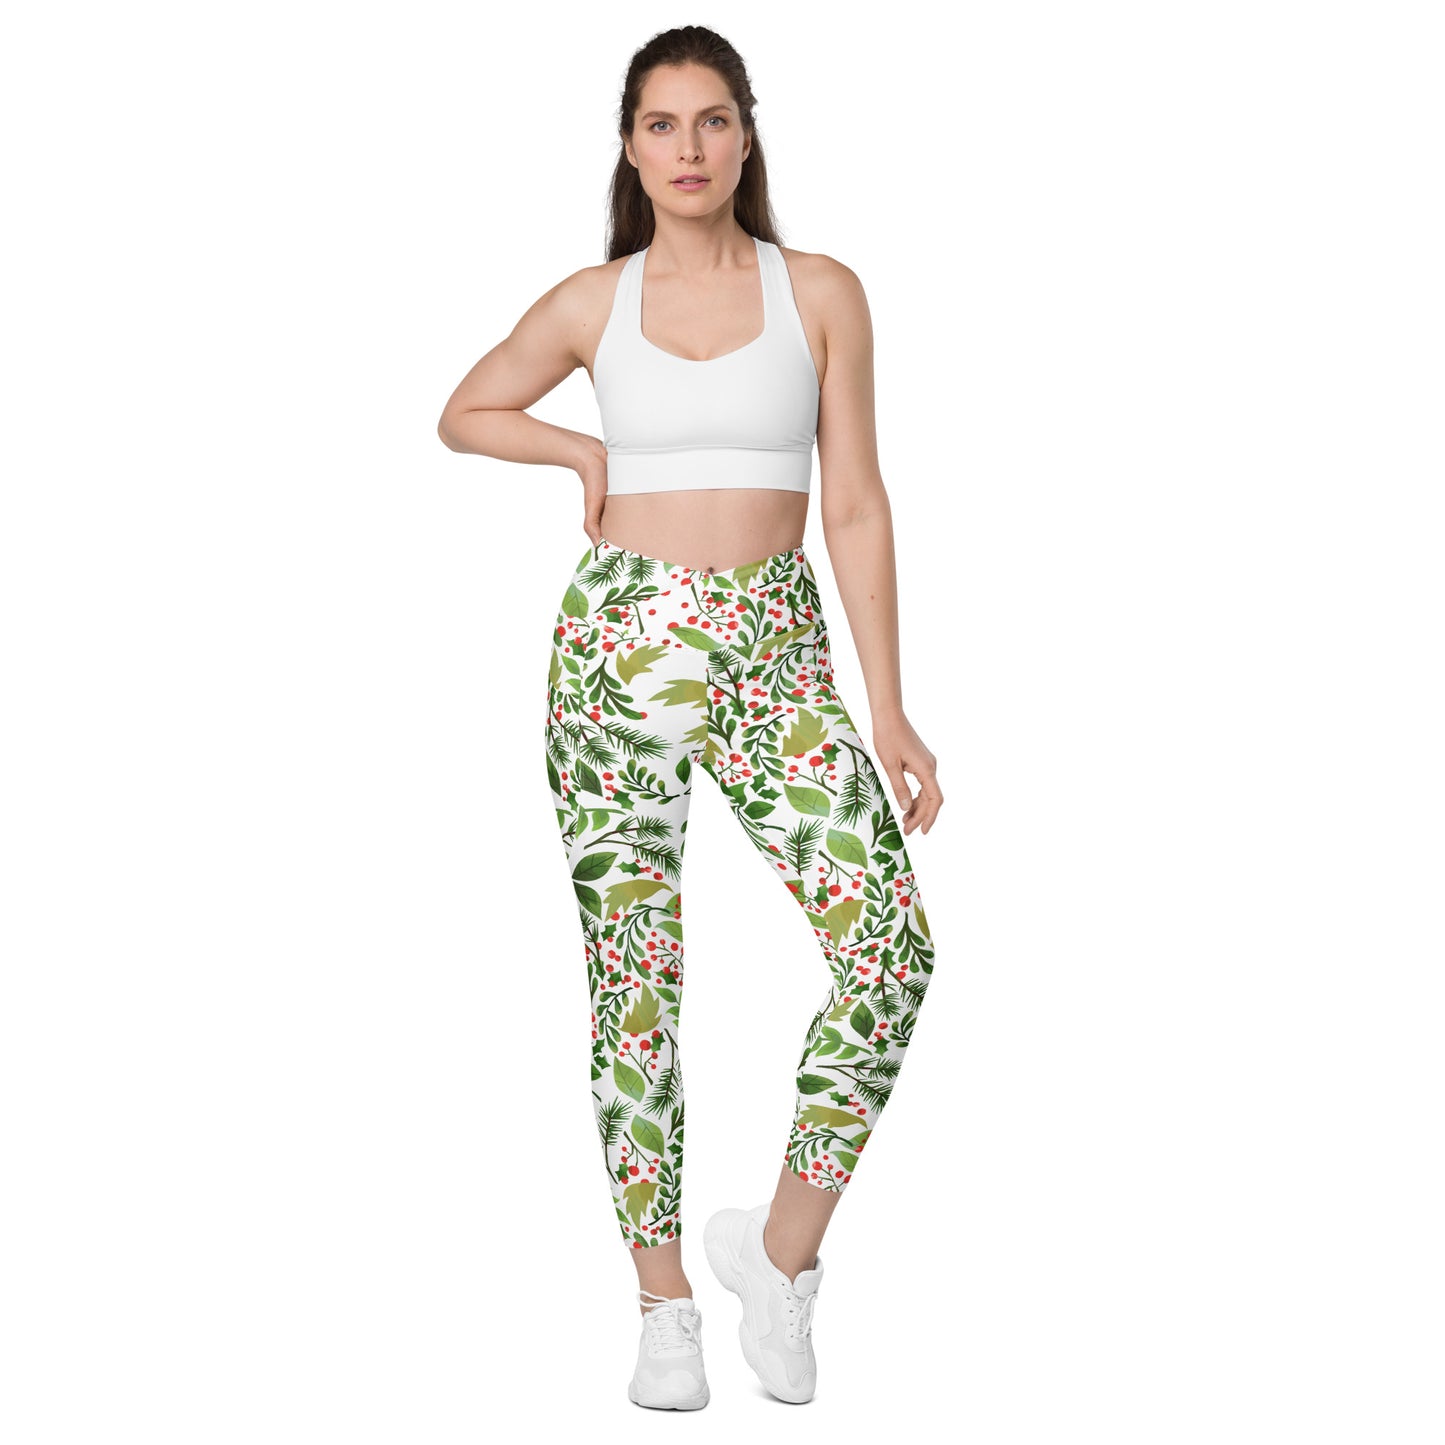 Holly Crossover leggings with pockets